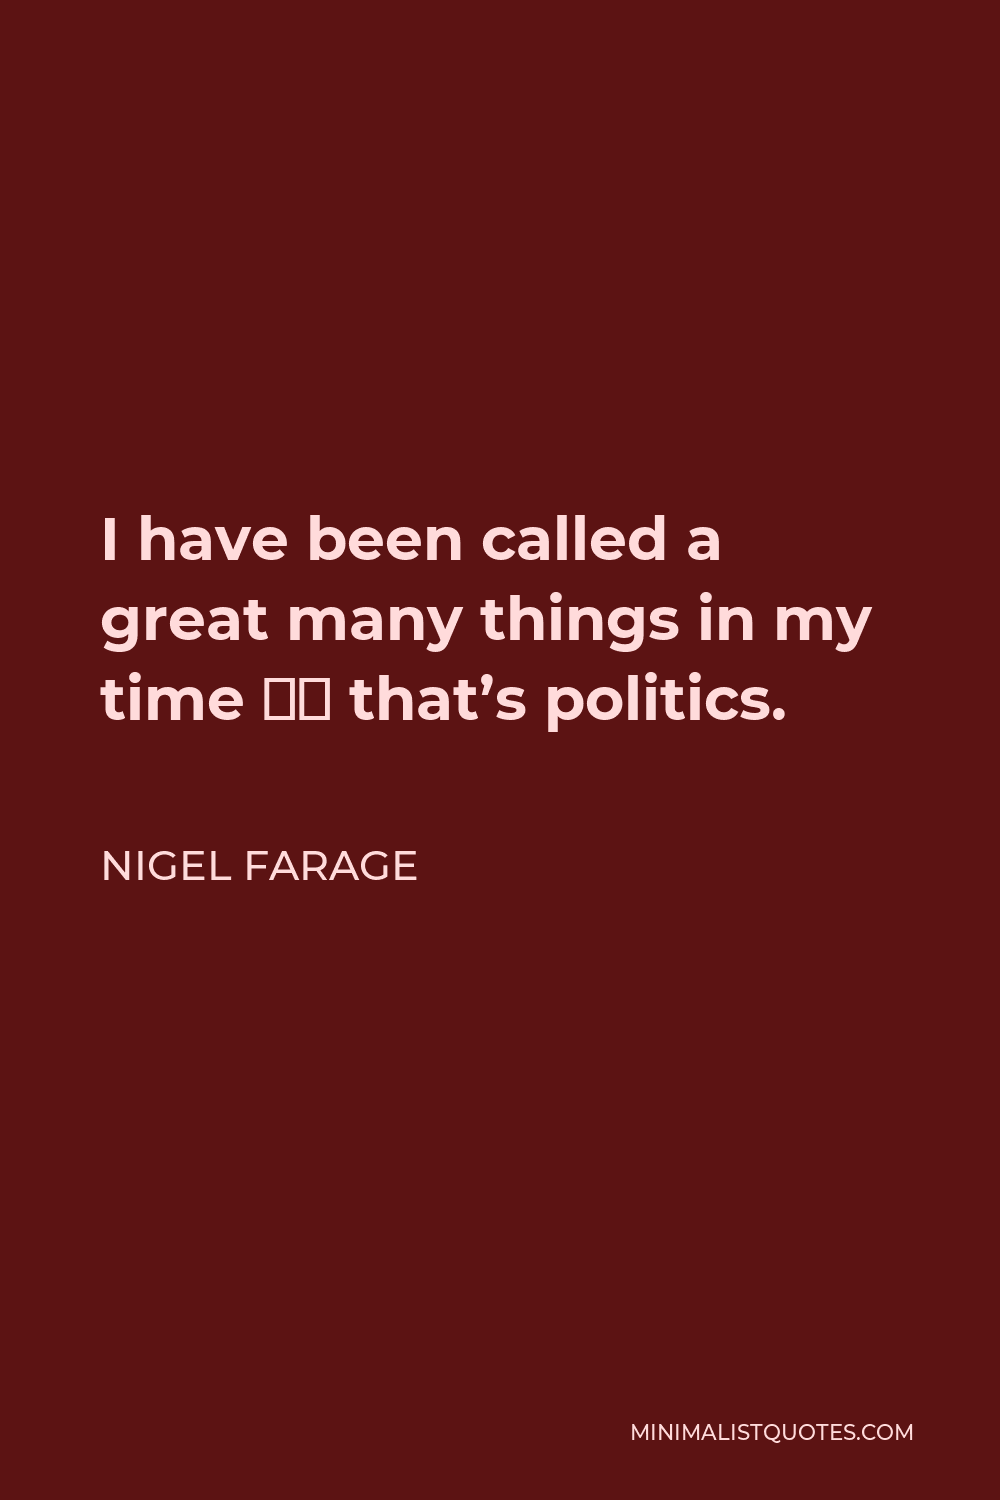 Nigel Farage Quote - I have been called a great many things in my time – that’s politics.